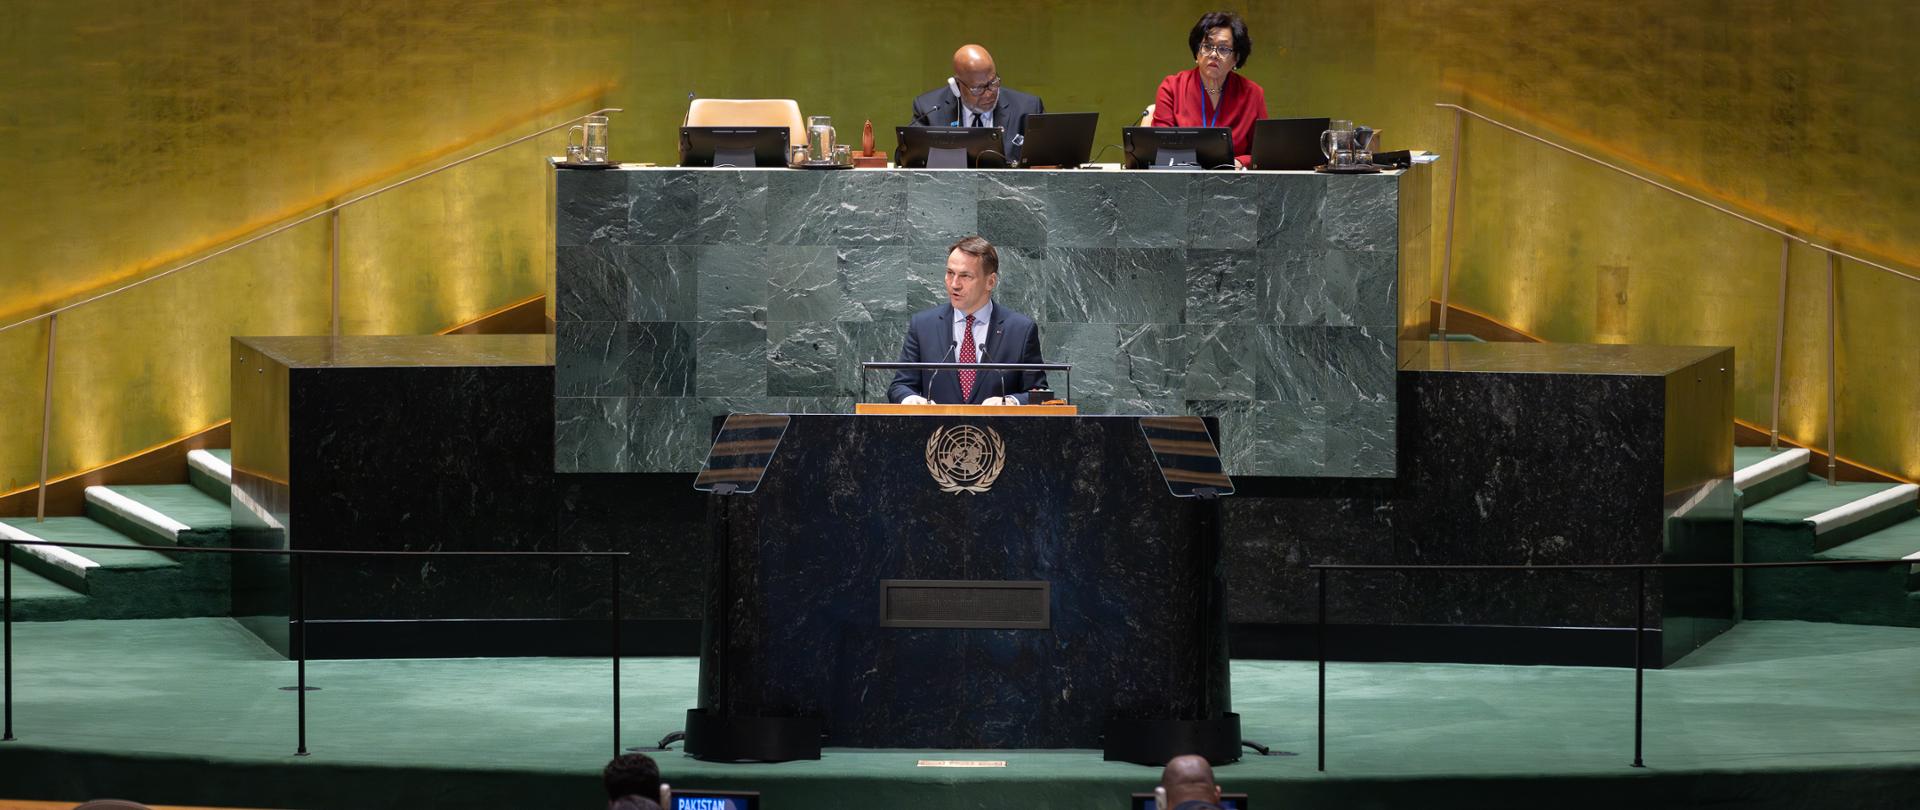 Foreign Minister Radosław Sikorski during the plenary meeting of the UN General Assembly 